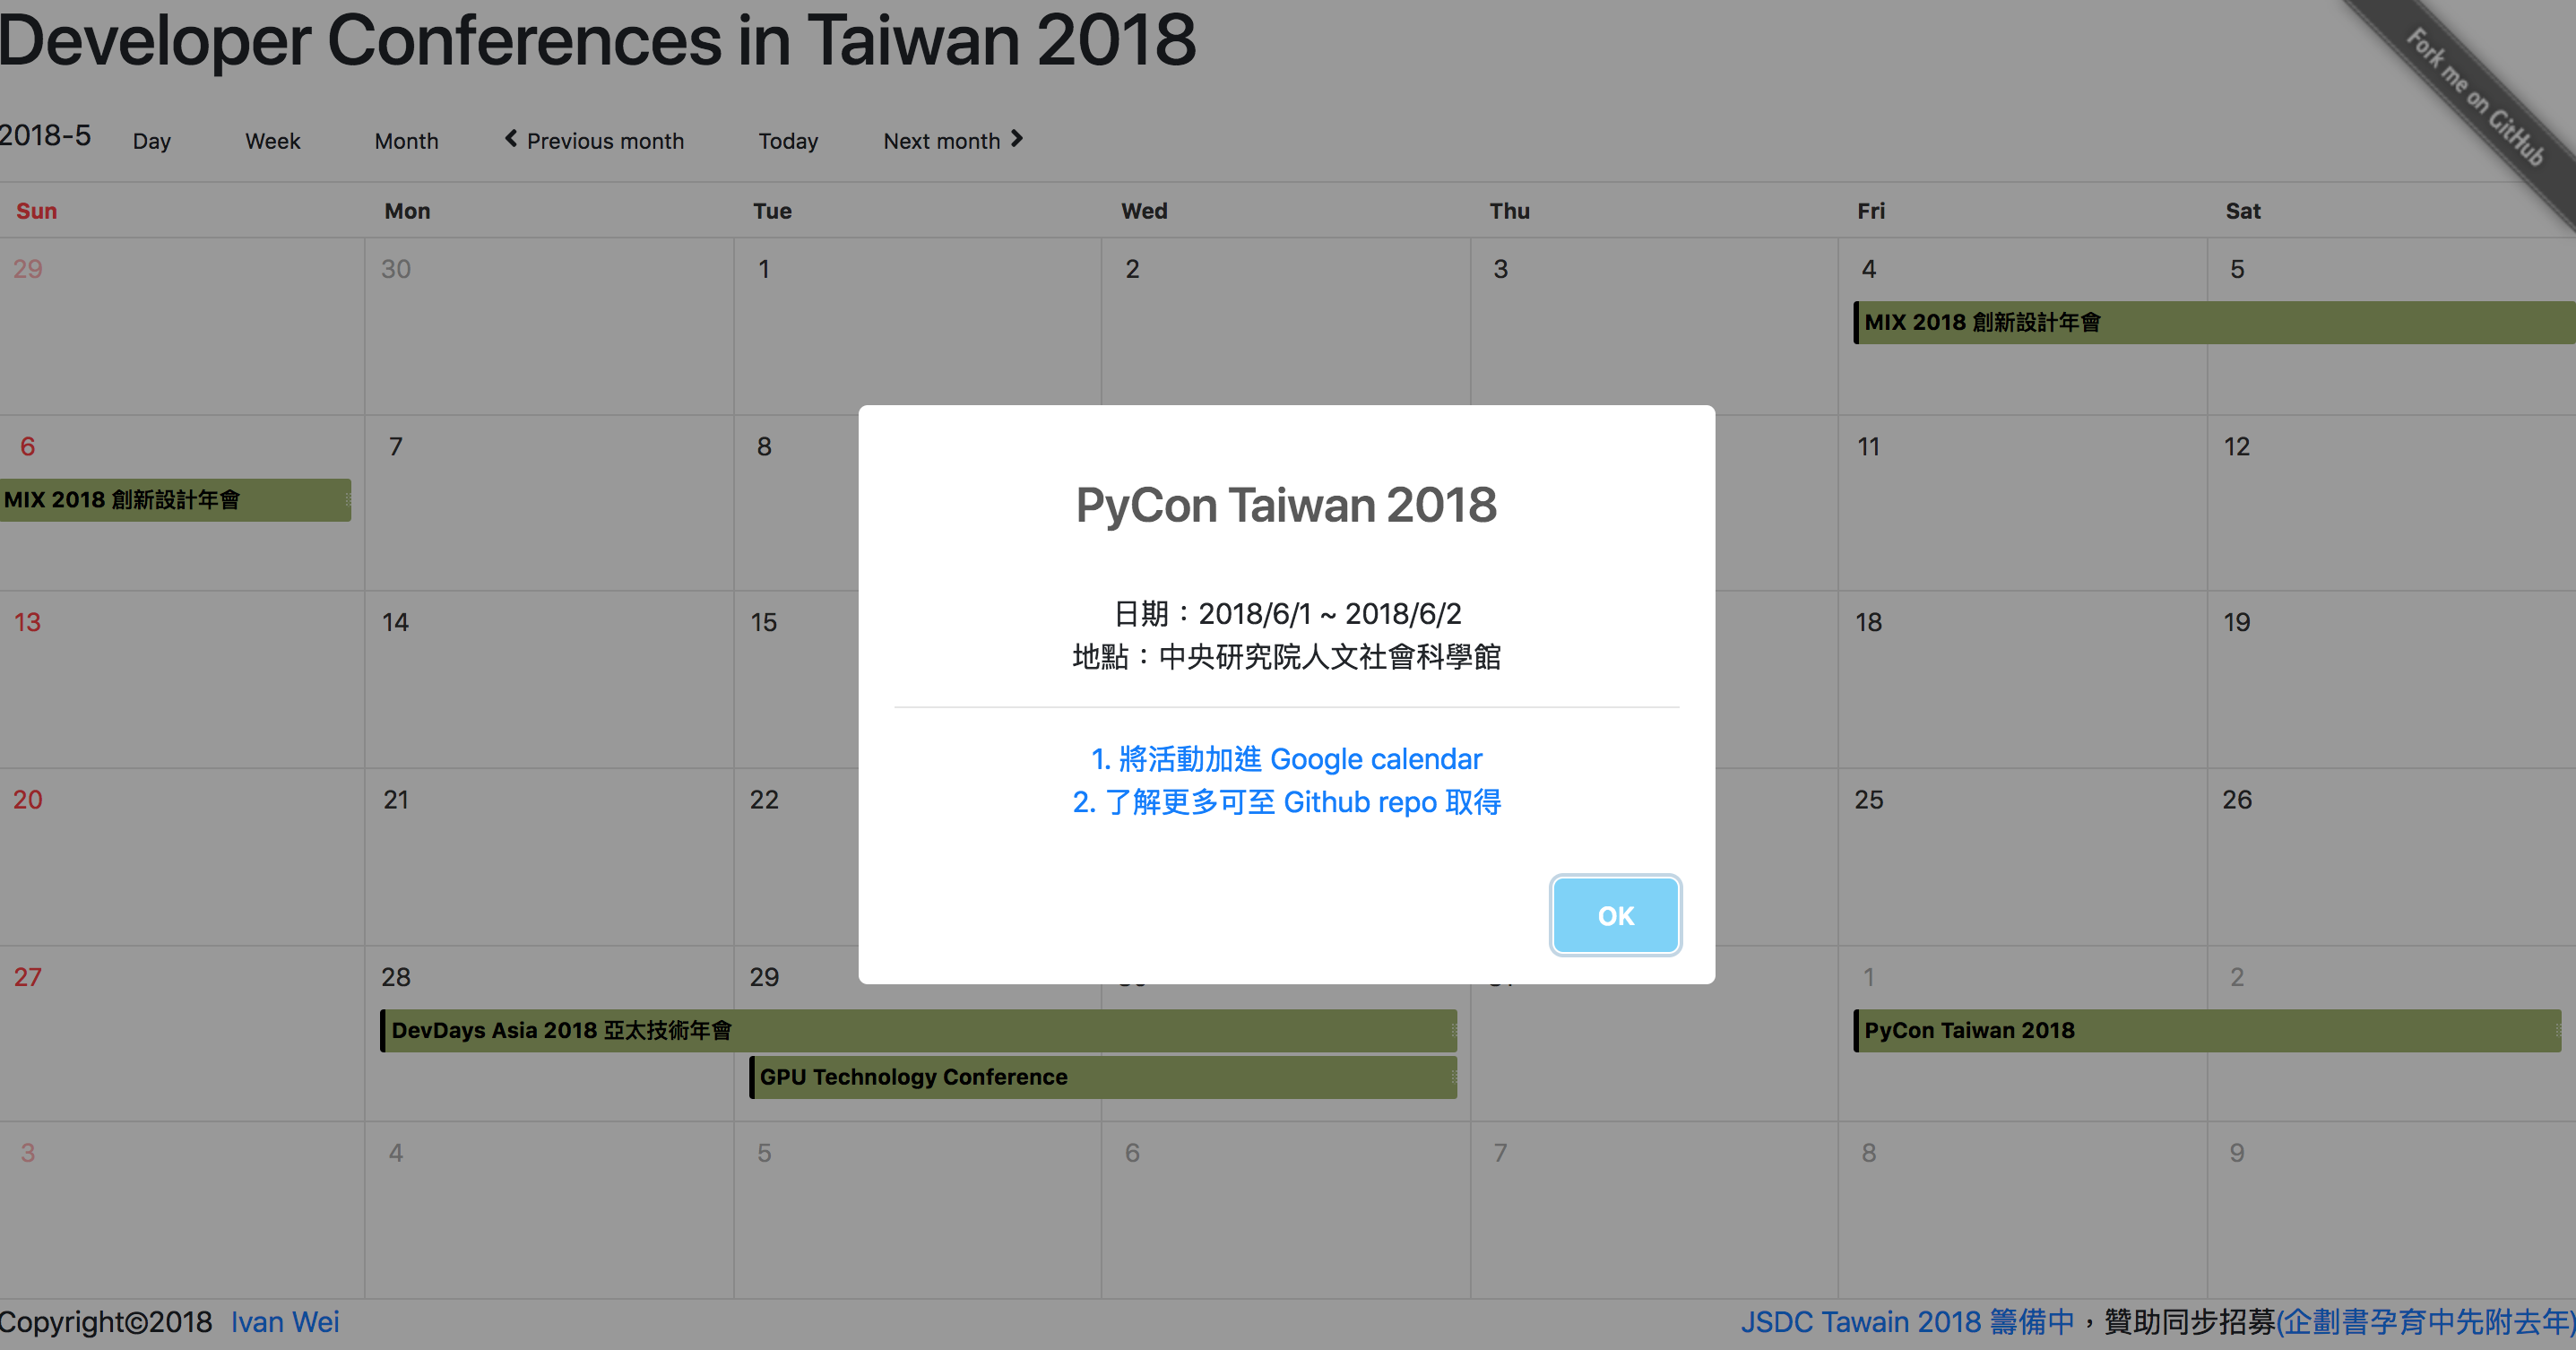 Developer Conferences In Taiwan